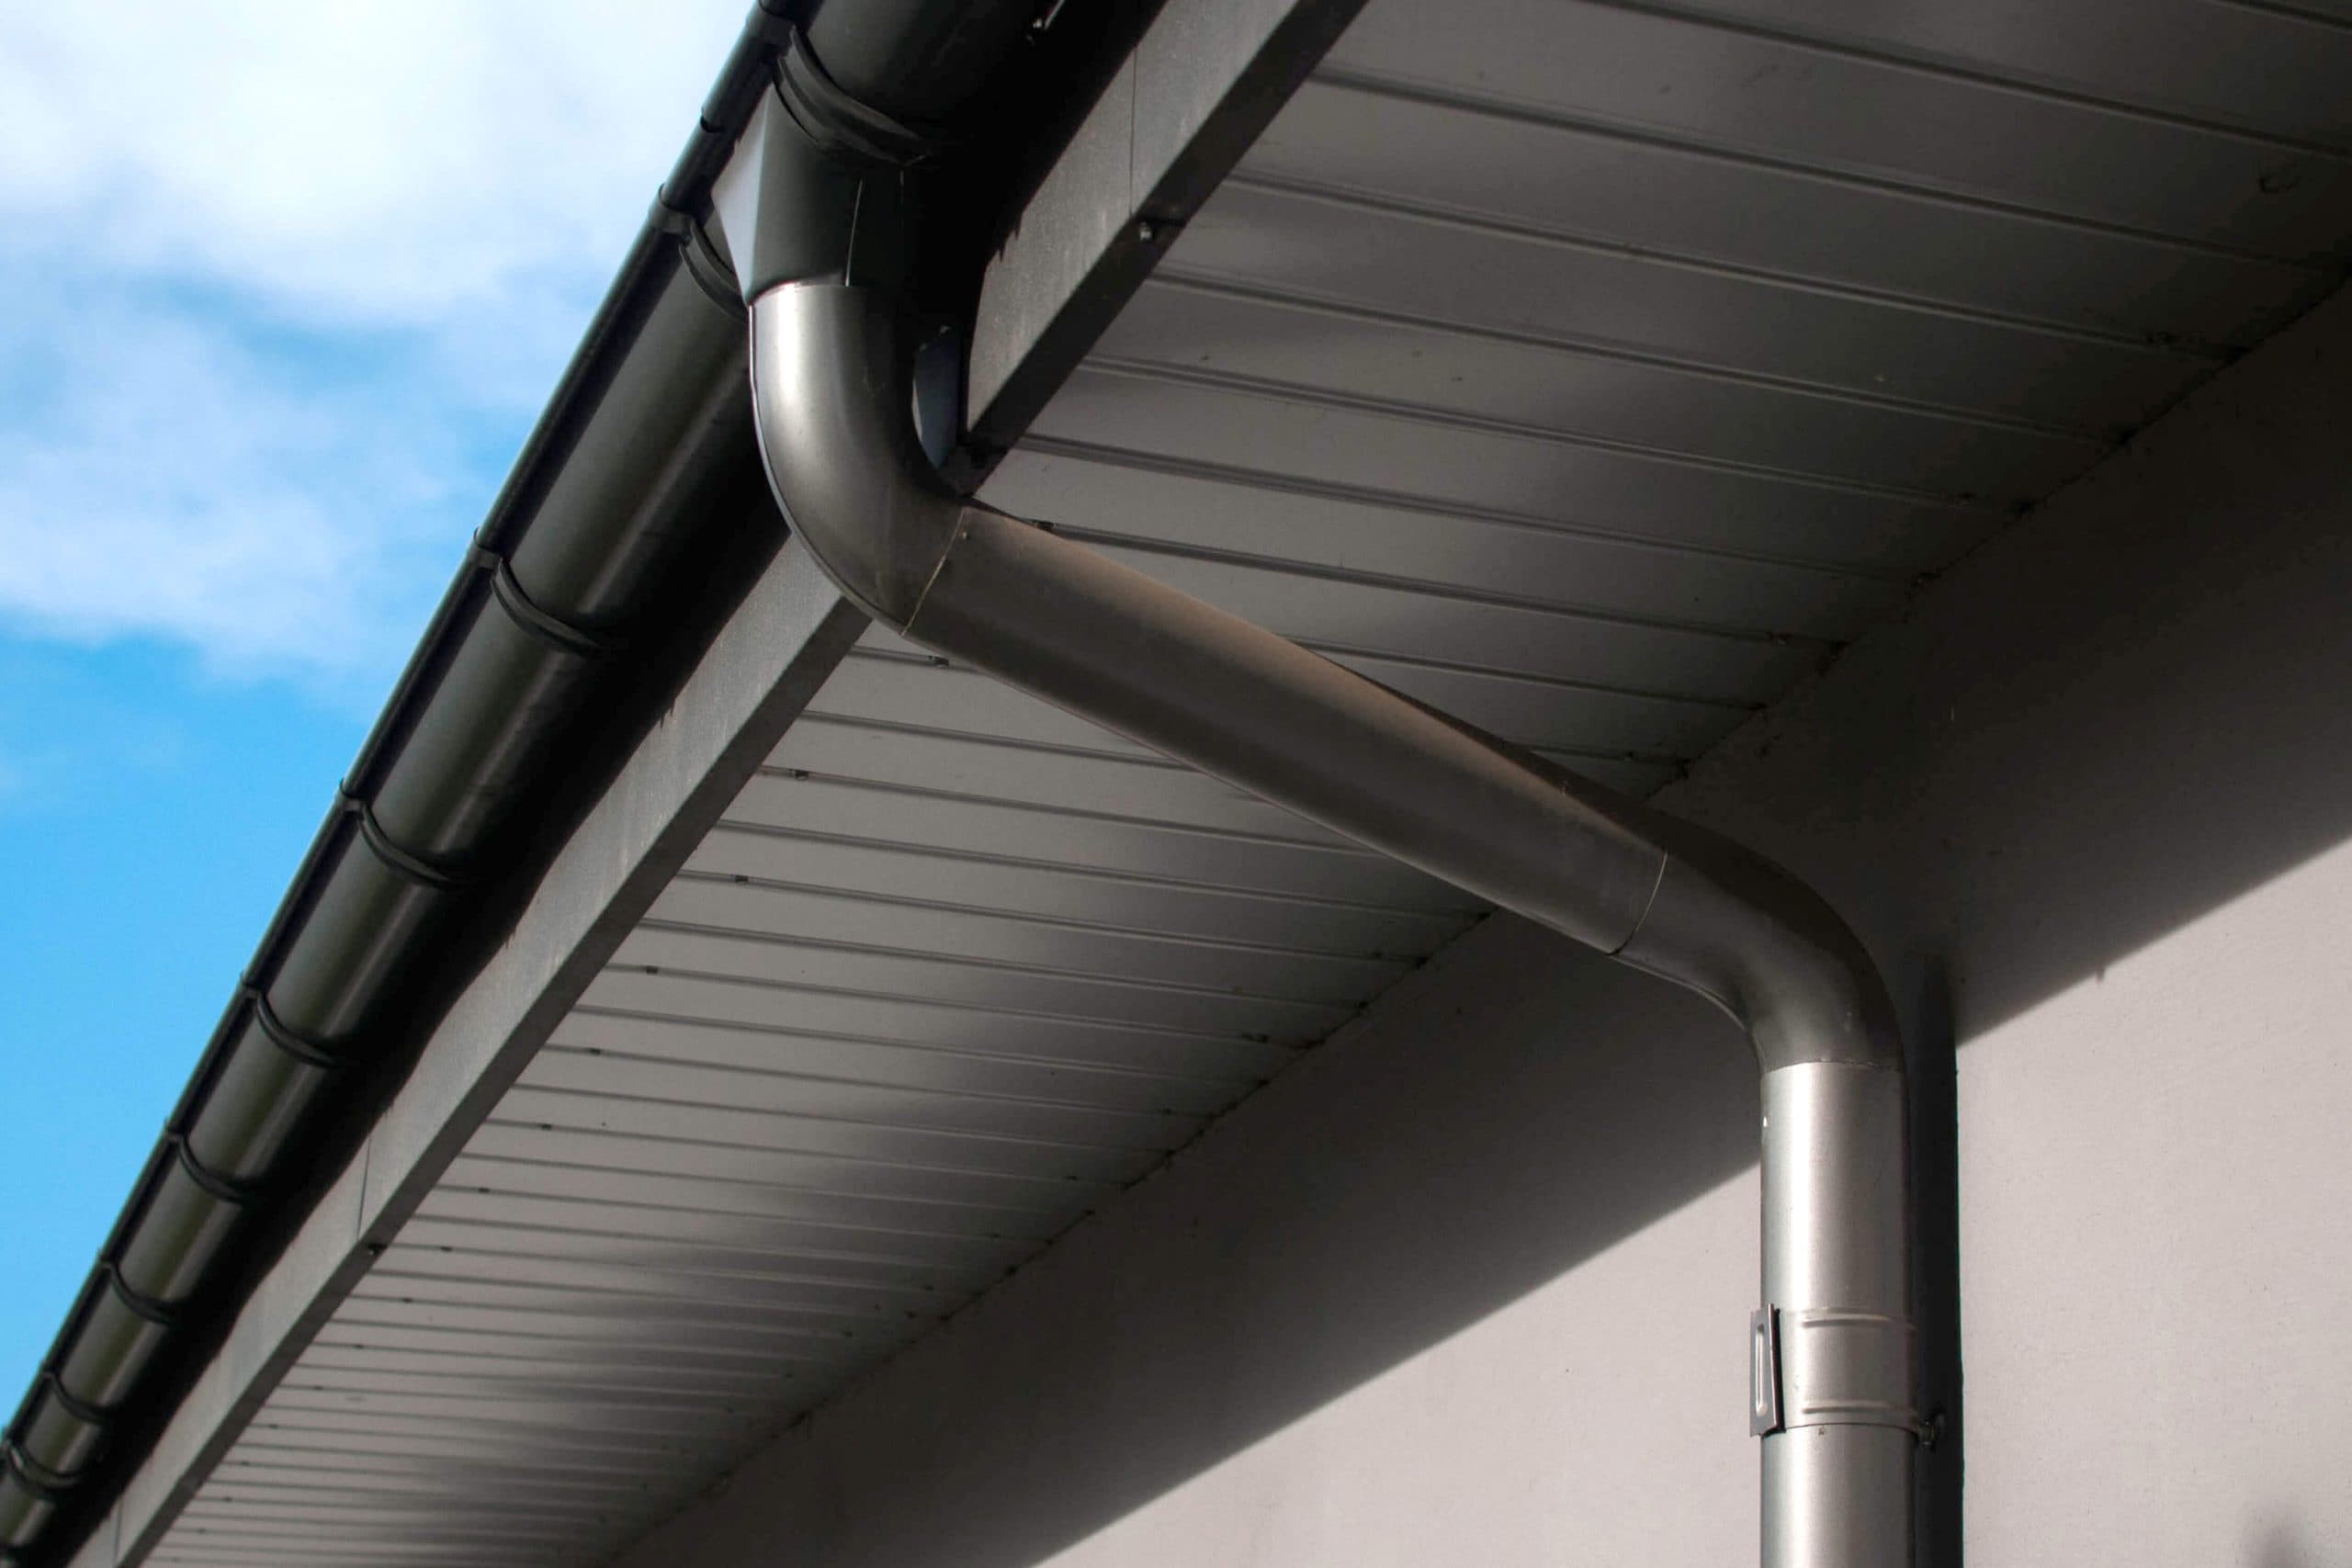 Corrosion-resistant galvanized gutters installed on a commercial building in Durham